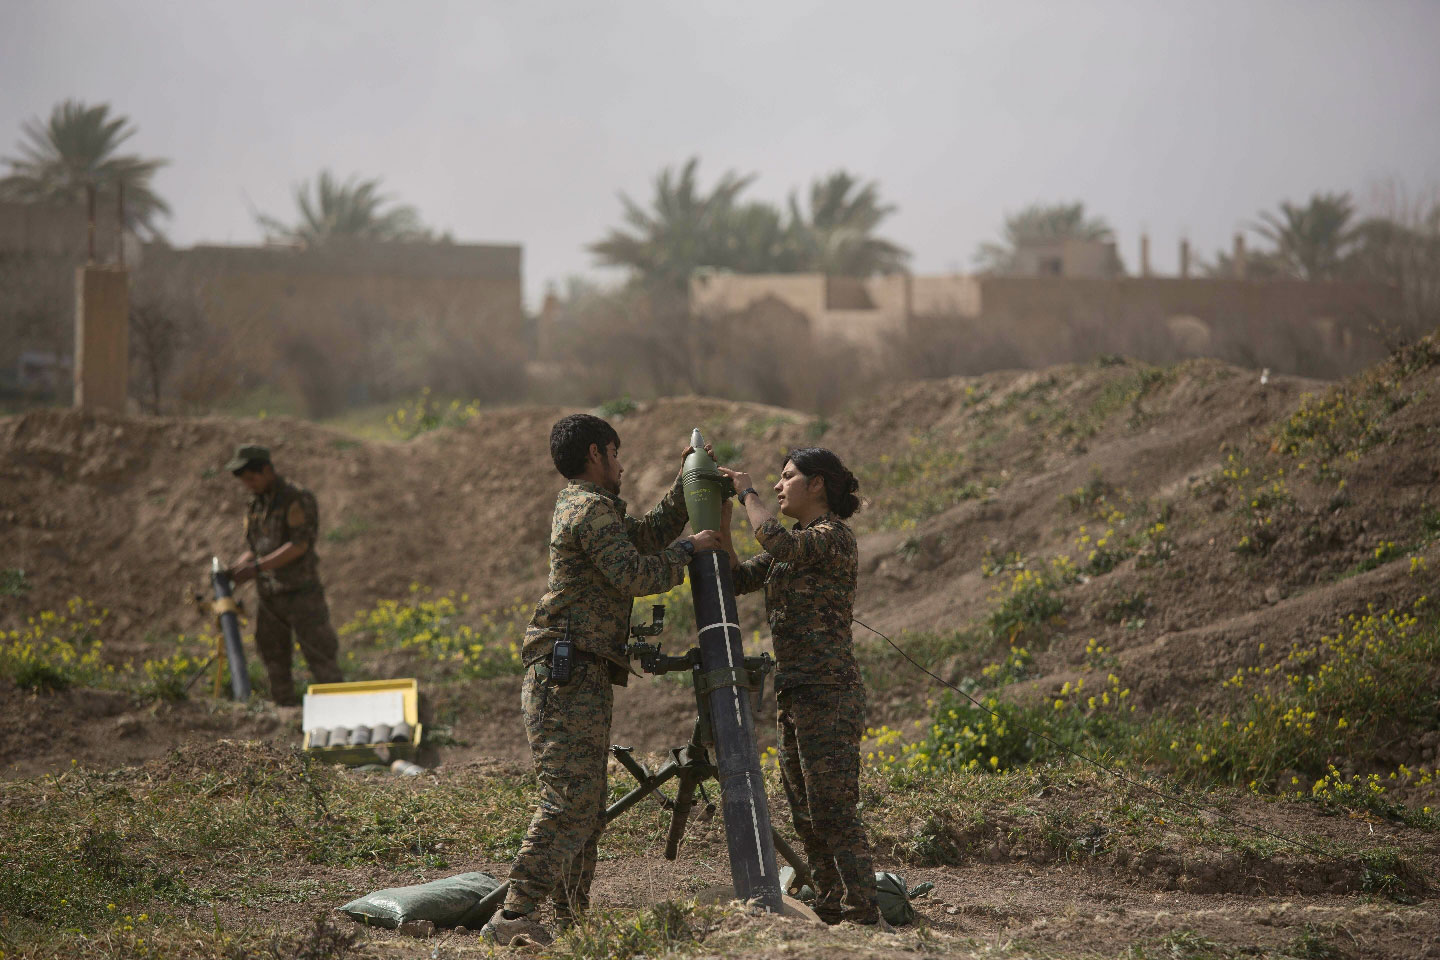 U.S.-backed Syrian Democratic Forces (SDF) soldiers prepare to fire mortars at Islamic State militant positions in Baghouz, Syria, Wednesday, March 13, 2019.